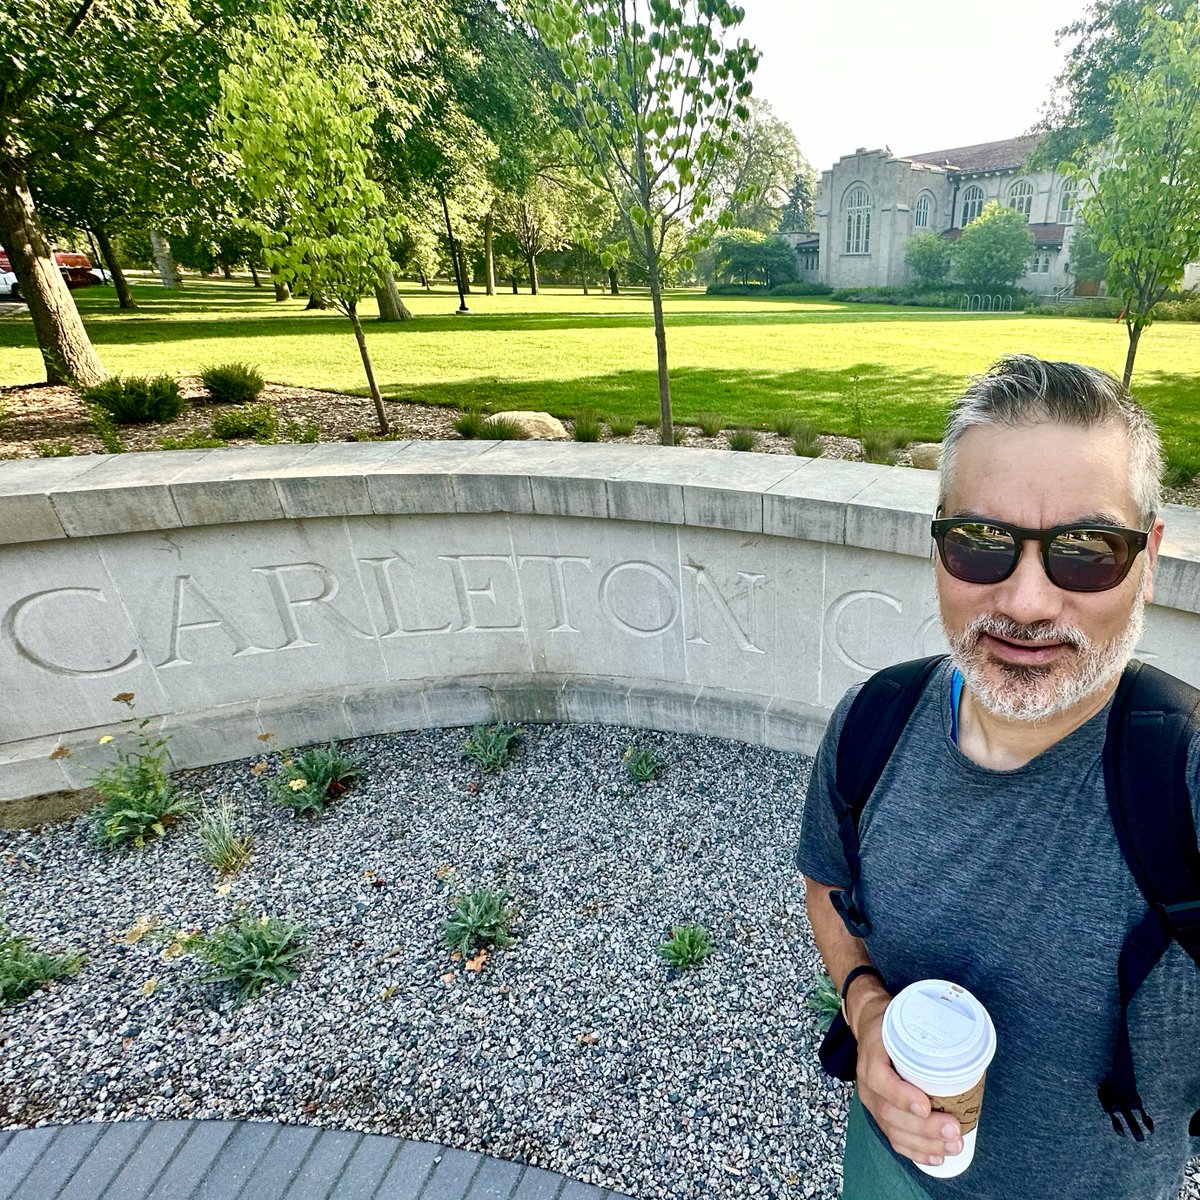 Really enjoying my visit to @CarletonCollege for our #AALAC workshop on #OpenScience at #LiberalArtsColleges. This workshop has been on ice since summer 2020 and I'm so happy we could finally make it happen. Thanks @juliafstrand for being THE BEST MOST AWESOME host!